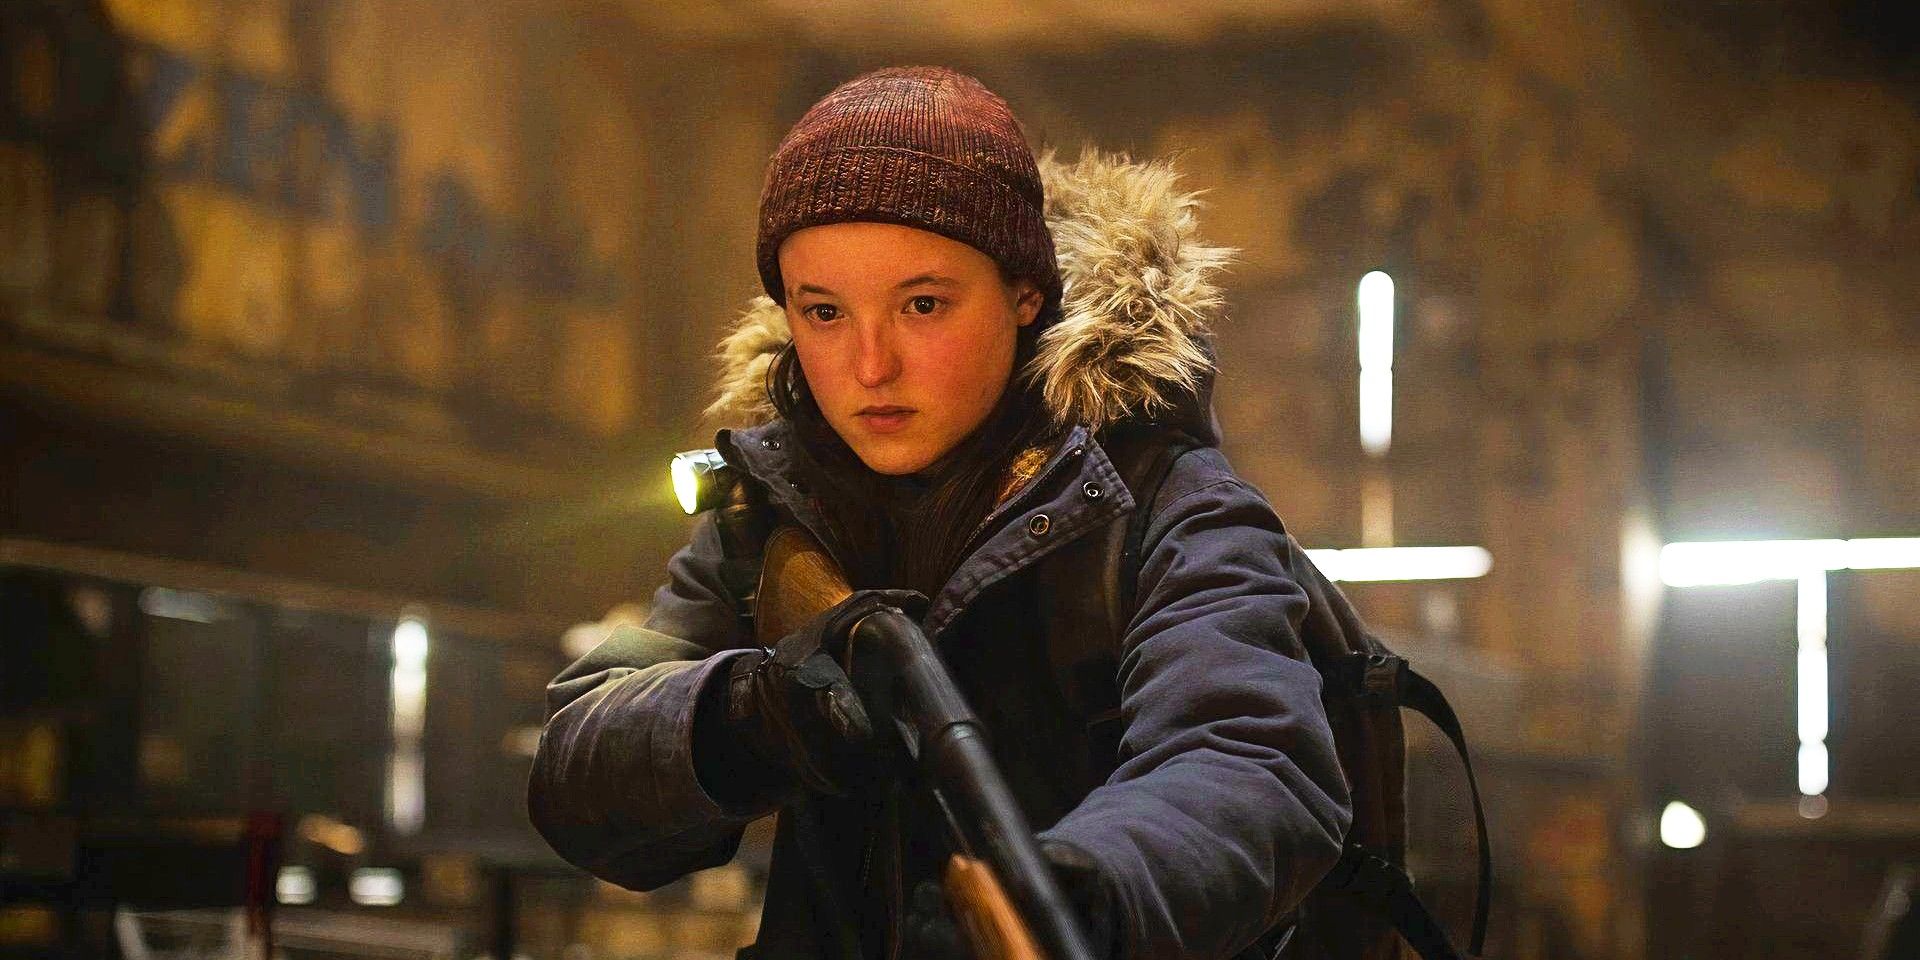 Bella Ramsey as Ellie wearing winter clothes and holding a shotgun in The Last of Us season 2